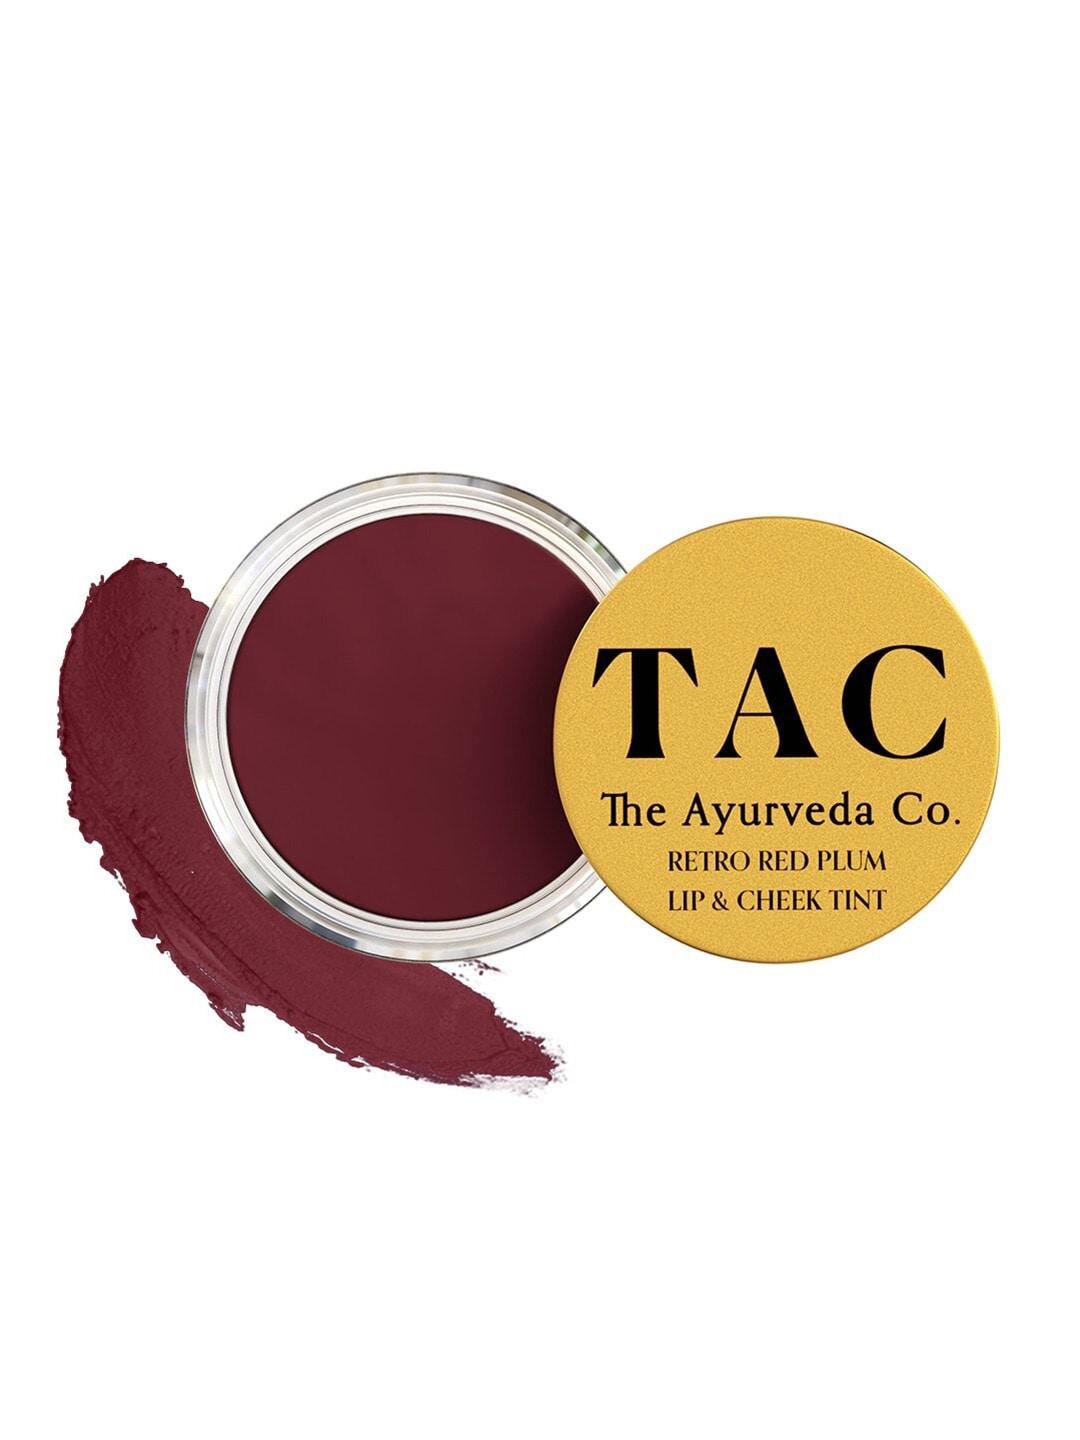 TAC - The Ayurveda Co. Retro Red Pulp Lip & Cheek Tint With Shea Butter